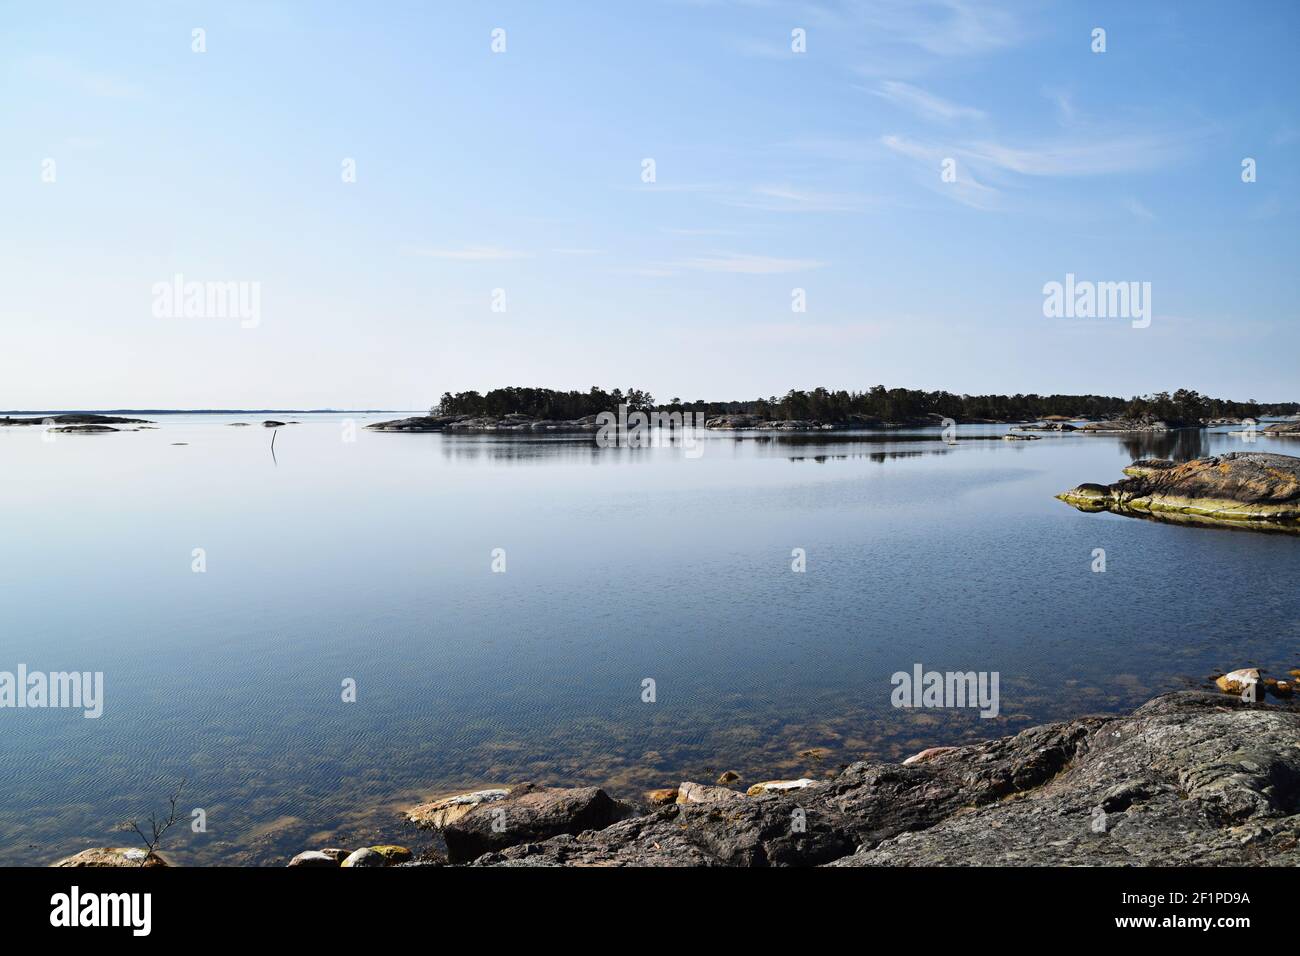 Tranquil sunny day in the Swedish archipelago. Calm water and no people around. Photo taken in the archipelago outside Oskarshamn in Sweden. Stock Photo